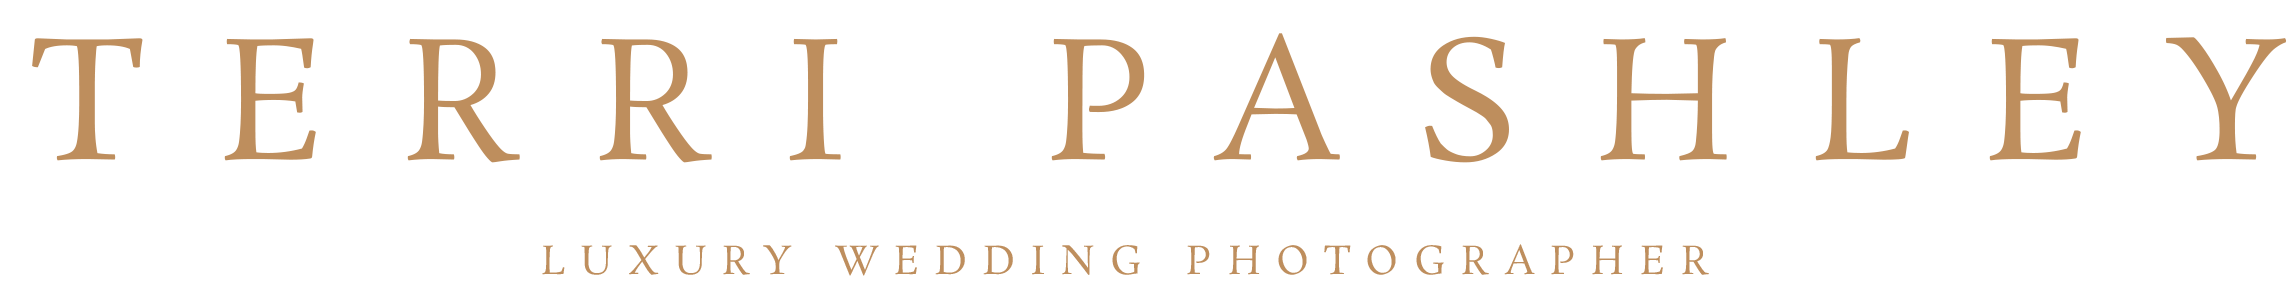 The Terri Pashley Photography logo in gold